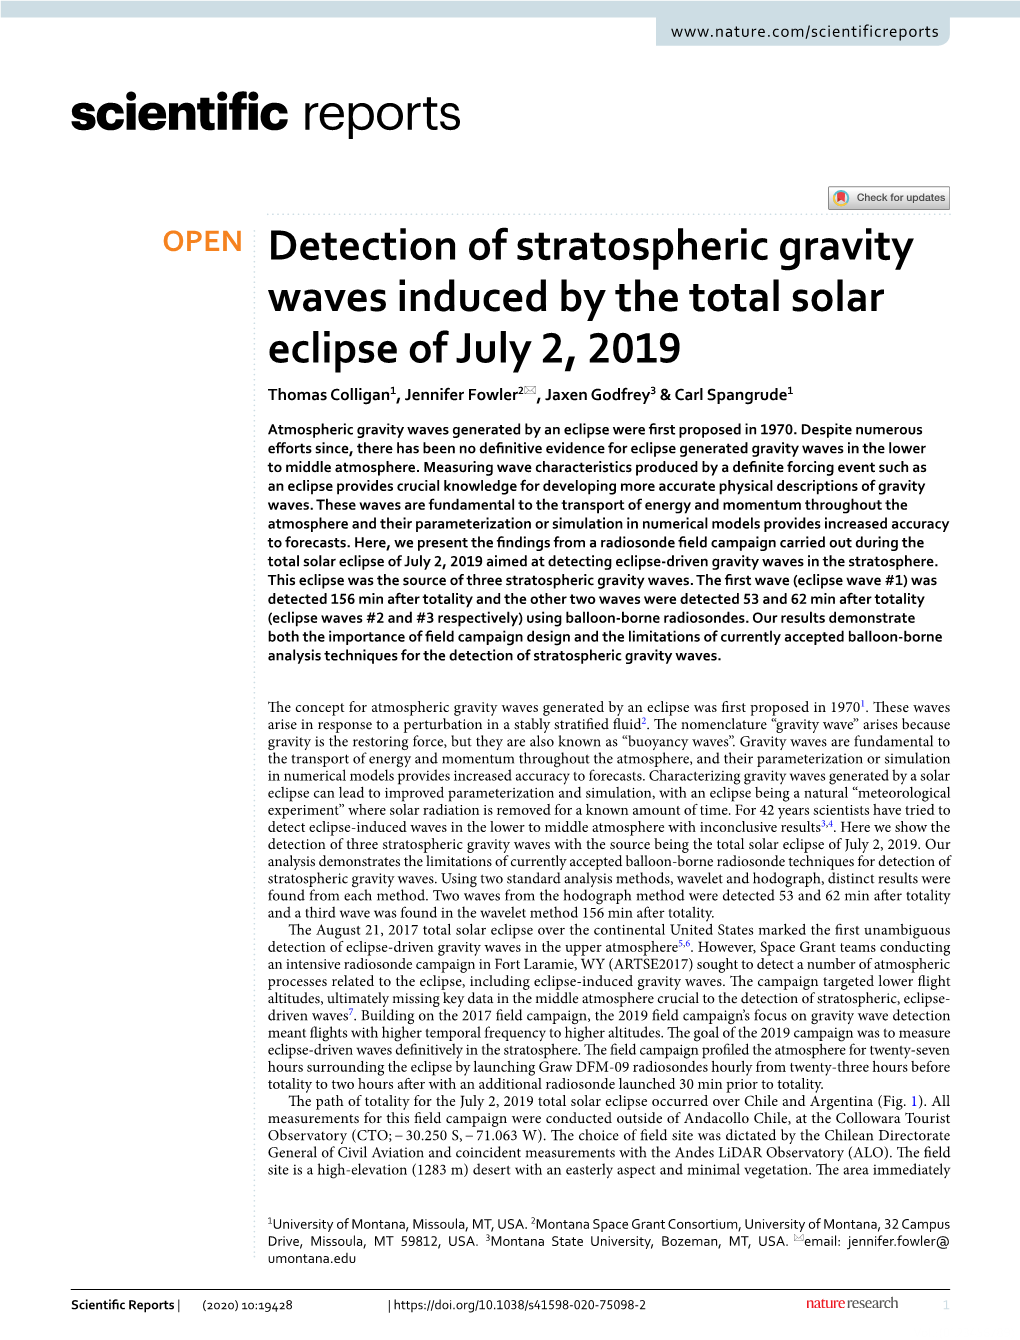 Detection of Stratospheric Gravity Waves Induced by the Total Solar Eclipse of July 2, 2019 Thomas Colligan1, Jennifer Fowler2*, Jaxen Godfrey3 & Carl Spangrude1